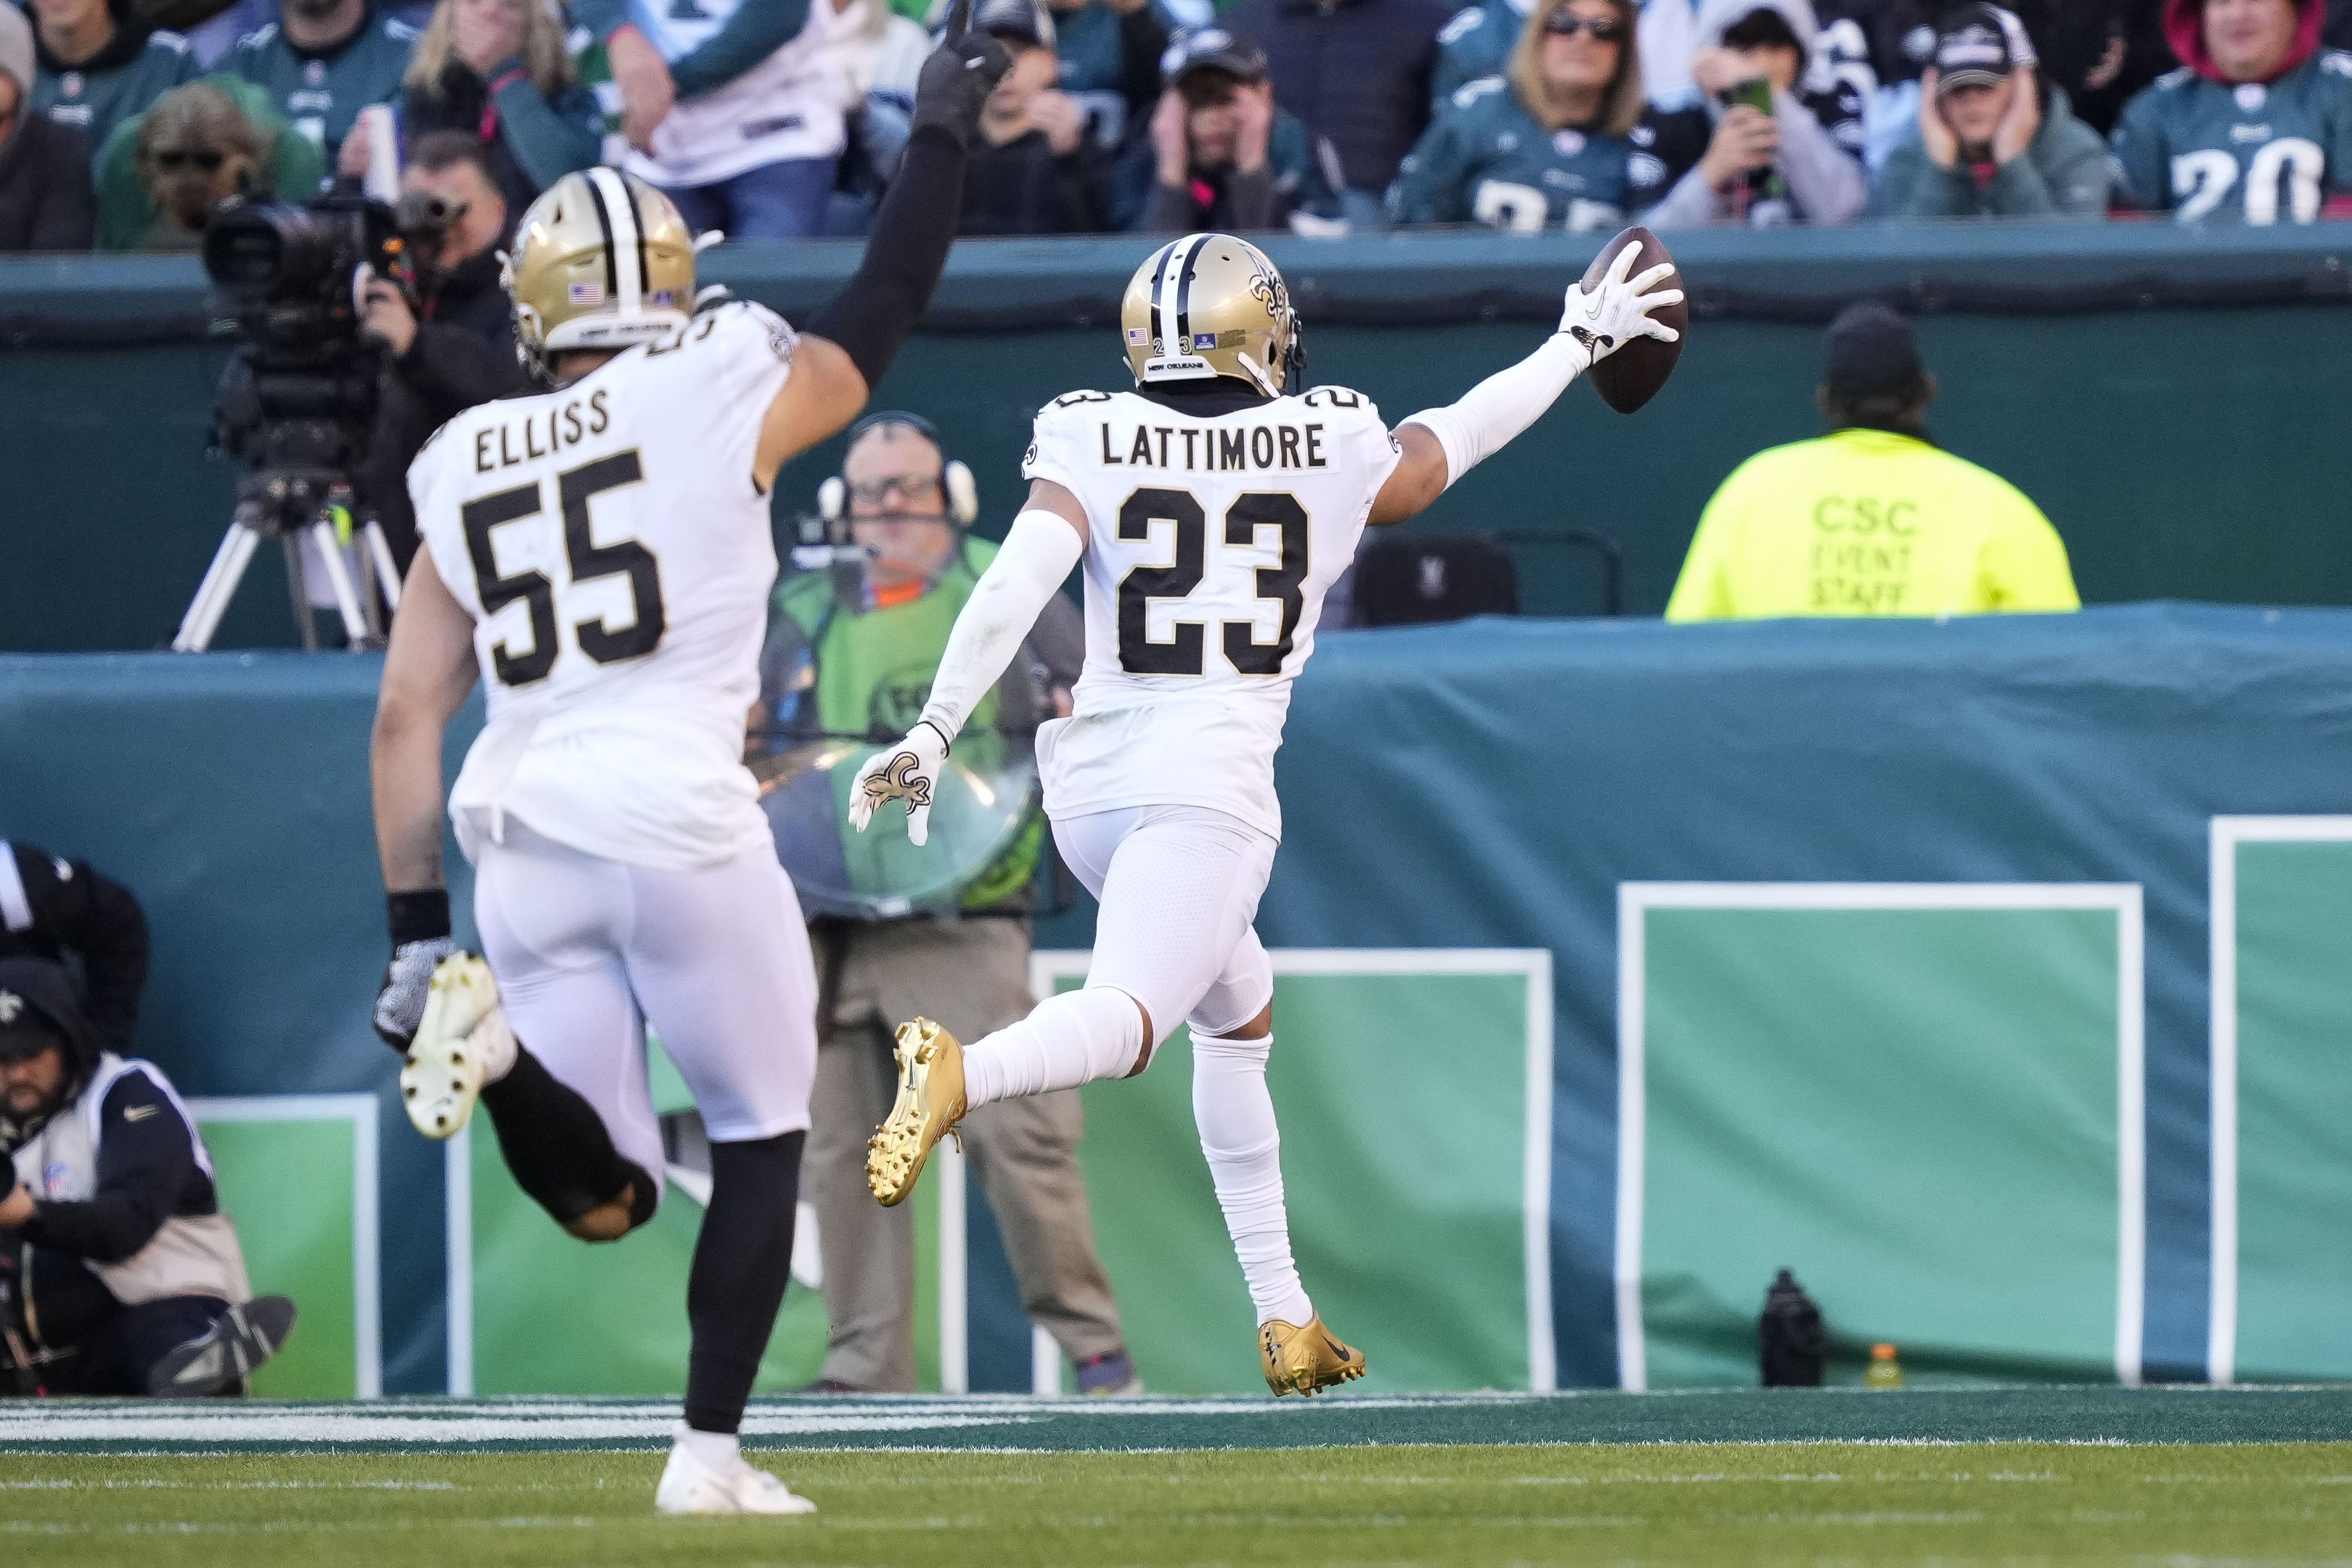 Saints win 20-10 in Philly, deny Eagles top spot in NFC